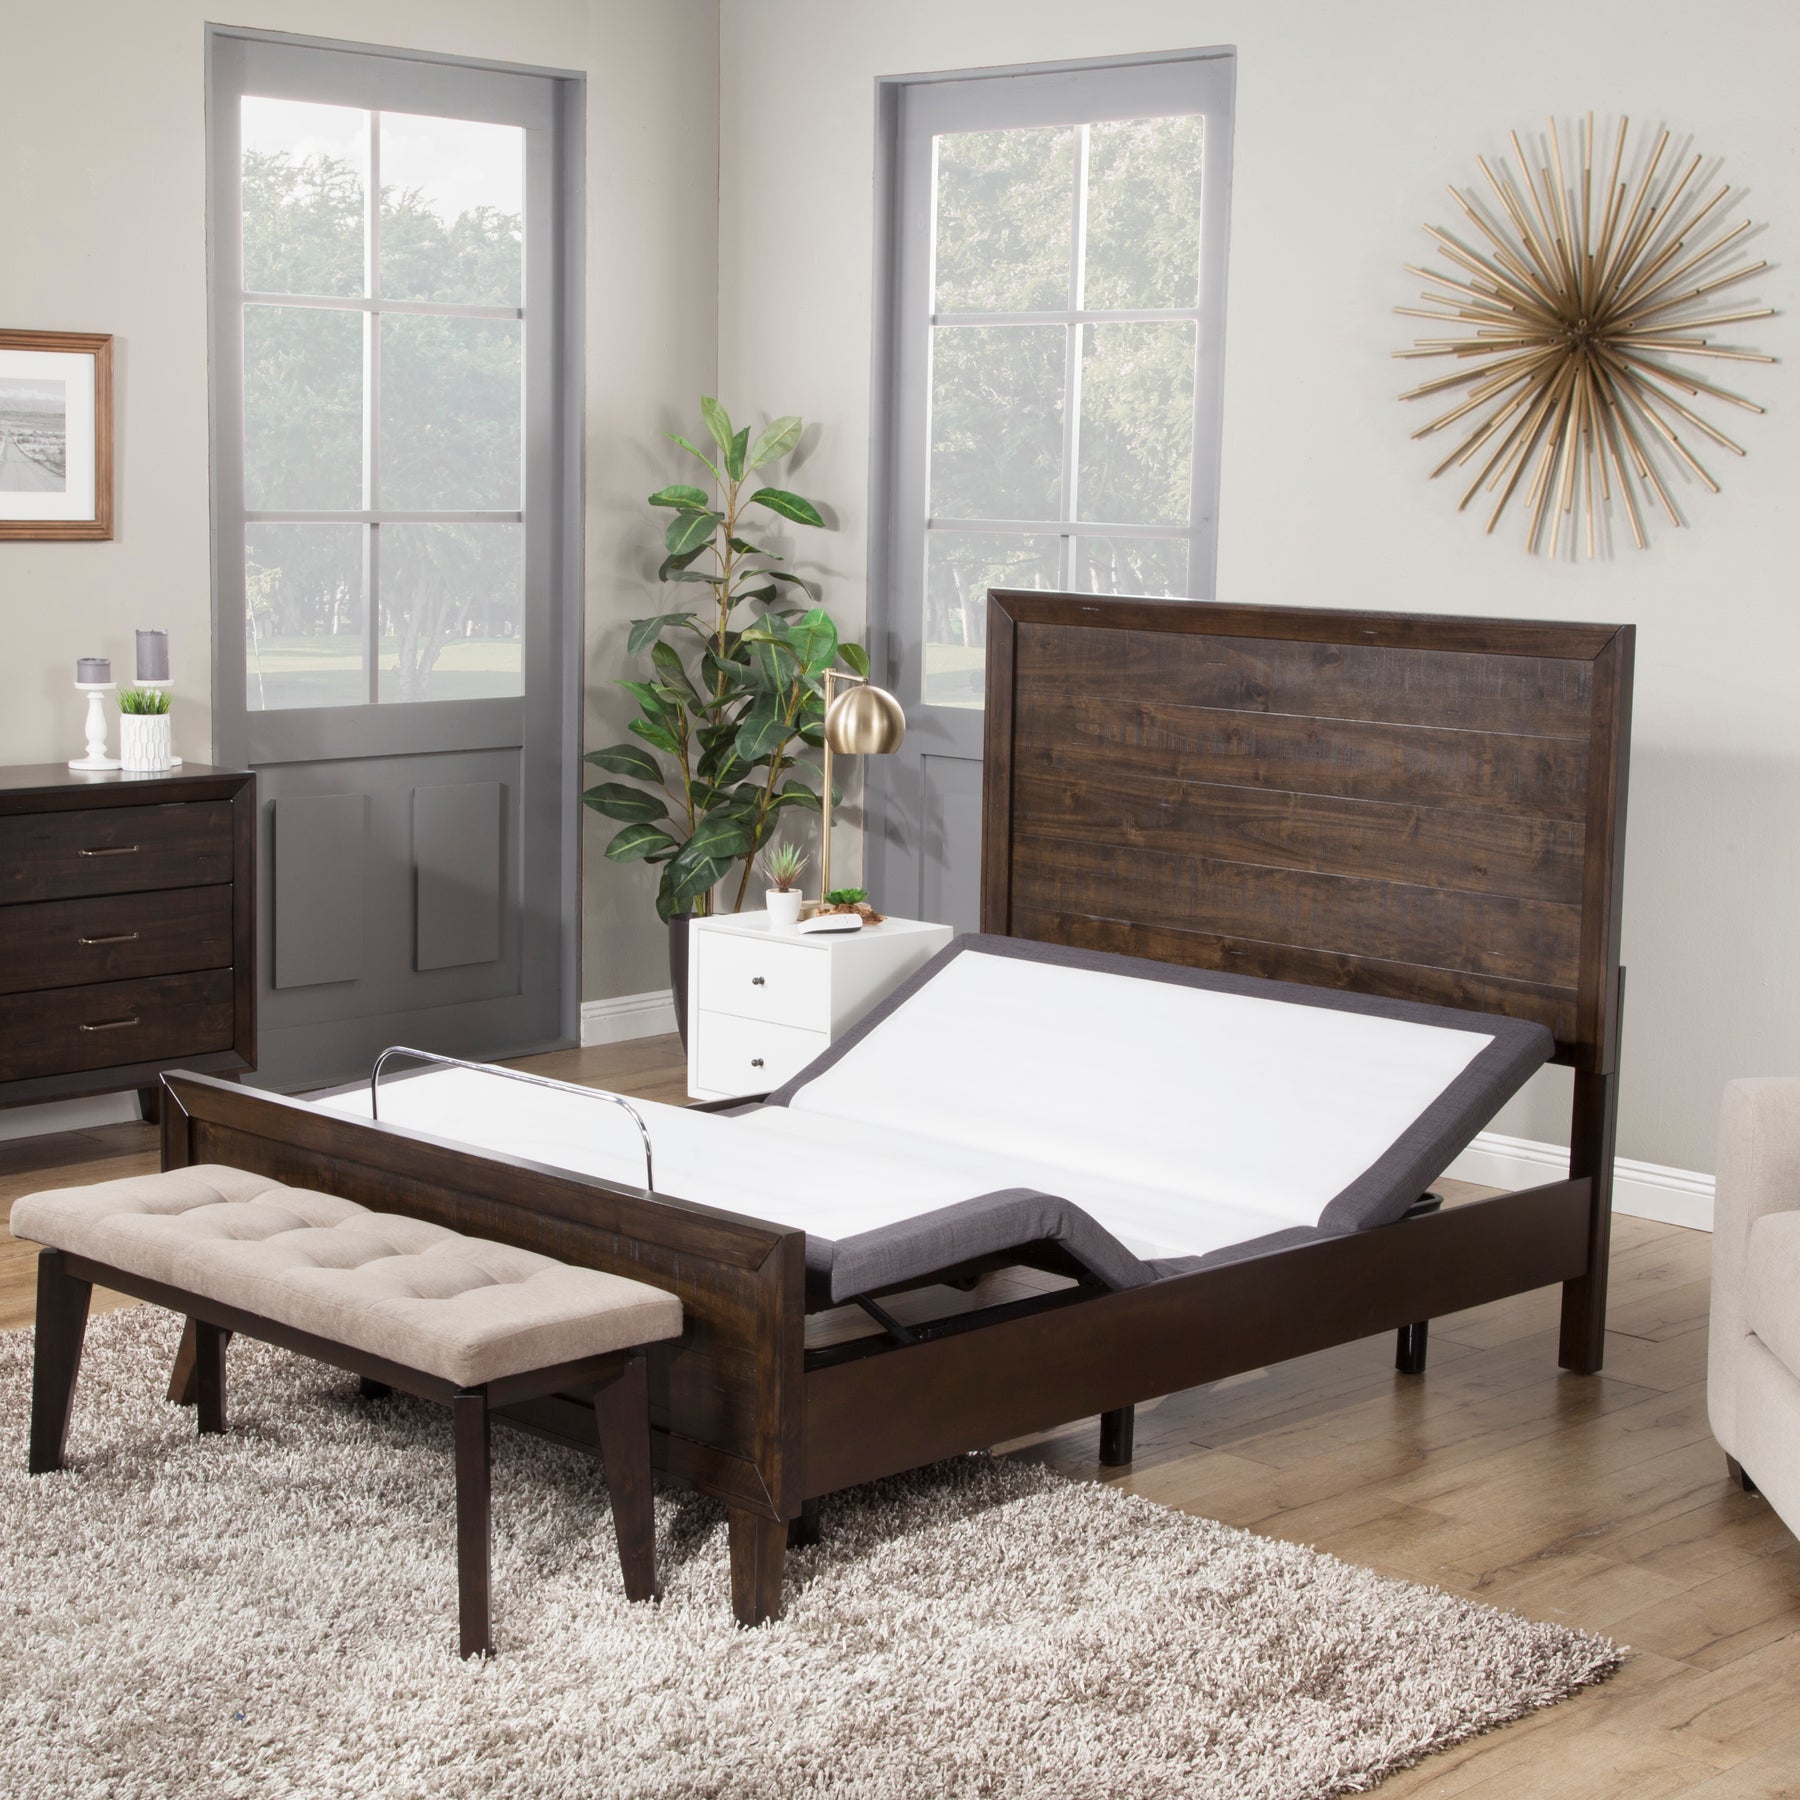 How to Use a Headboard With an Adjustable Base